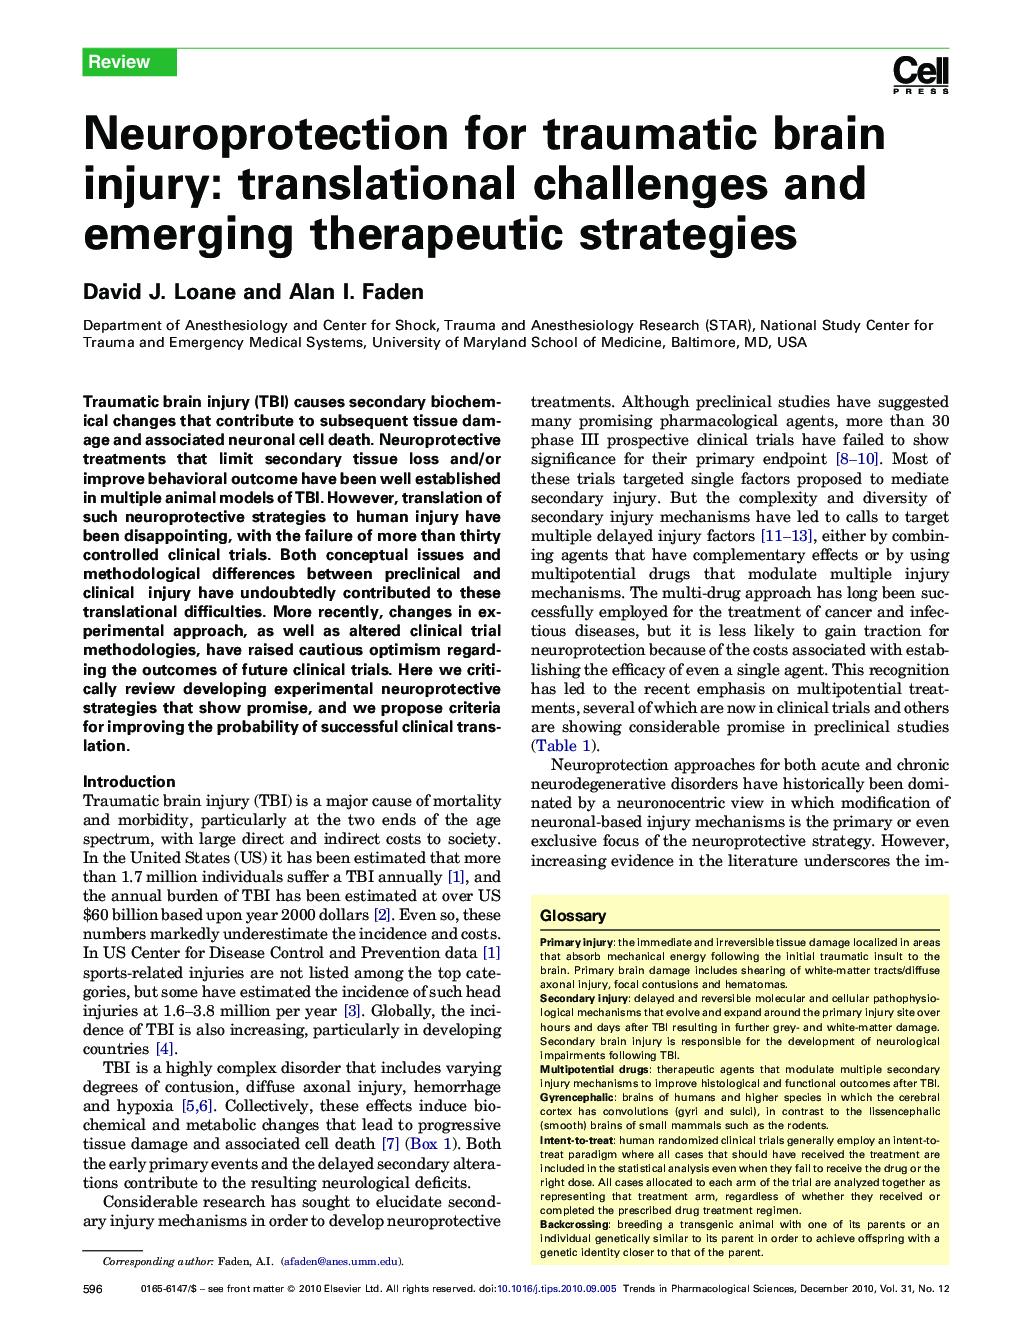 Neuroprotection for traumatic brain injury: translational challenges and emerging therapeutic strategies